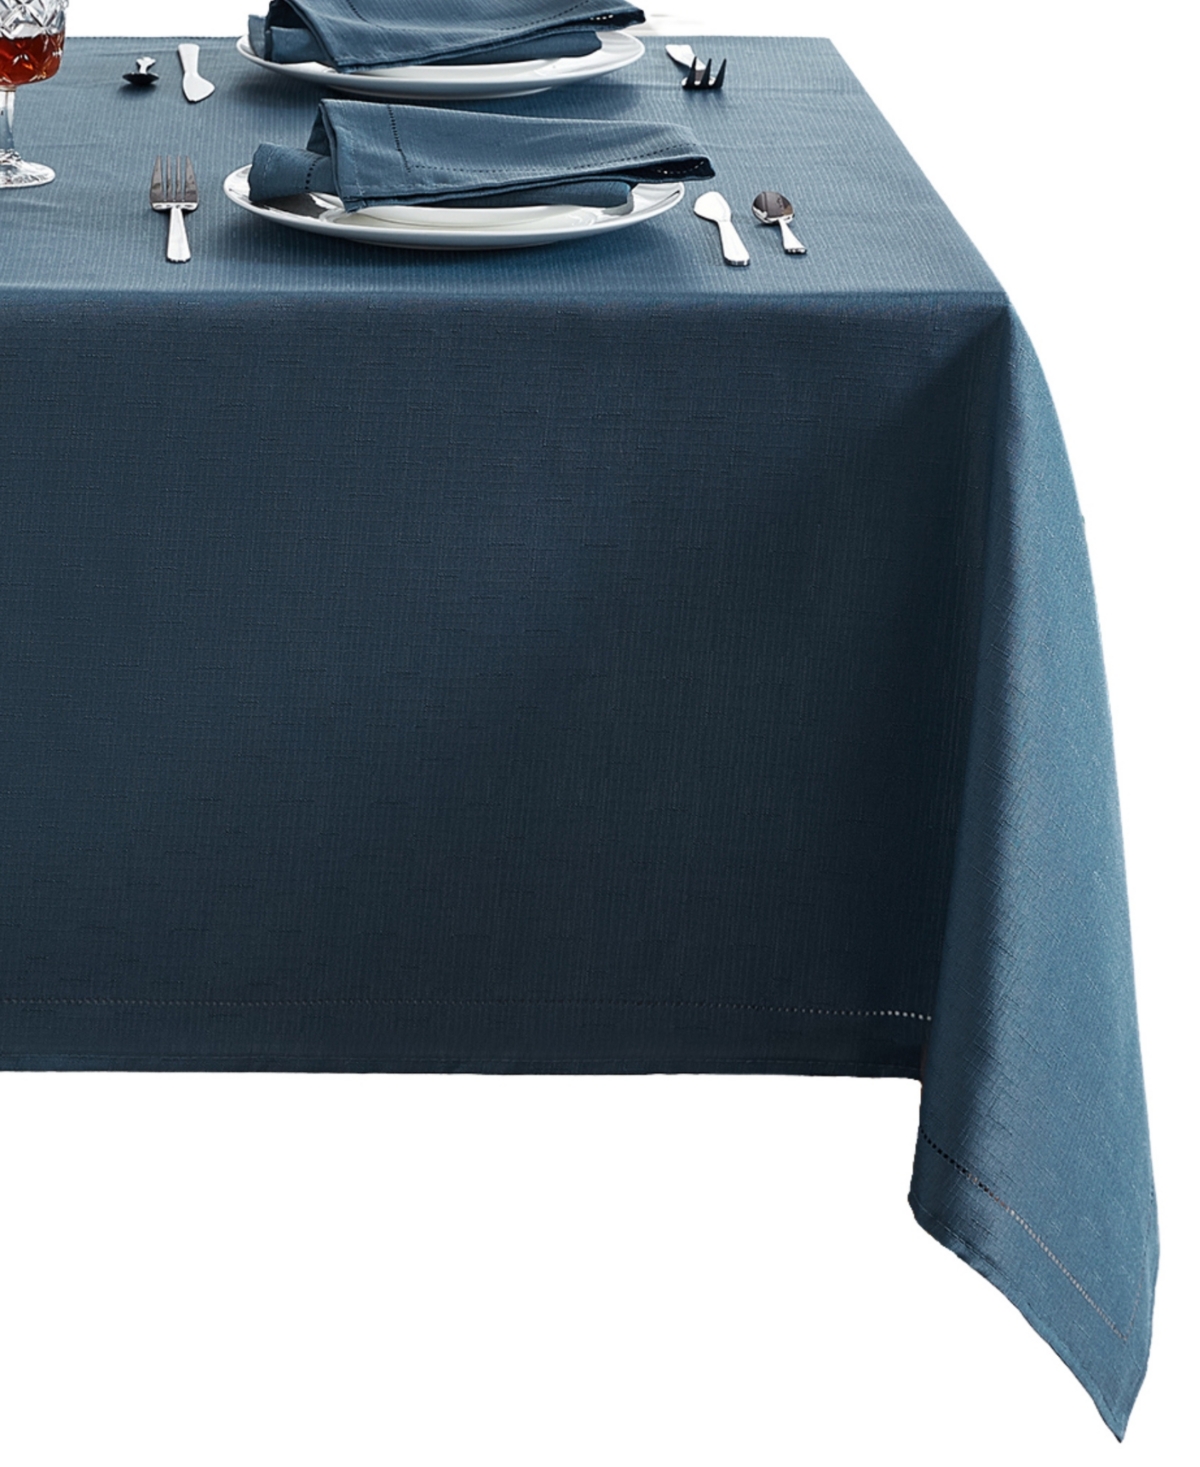 Elrene Alison Eyelet Punched Border Fabric Tablecloth, 52" X 70" In Copen Blue